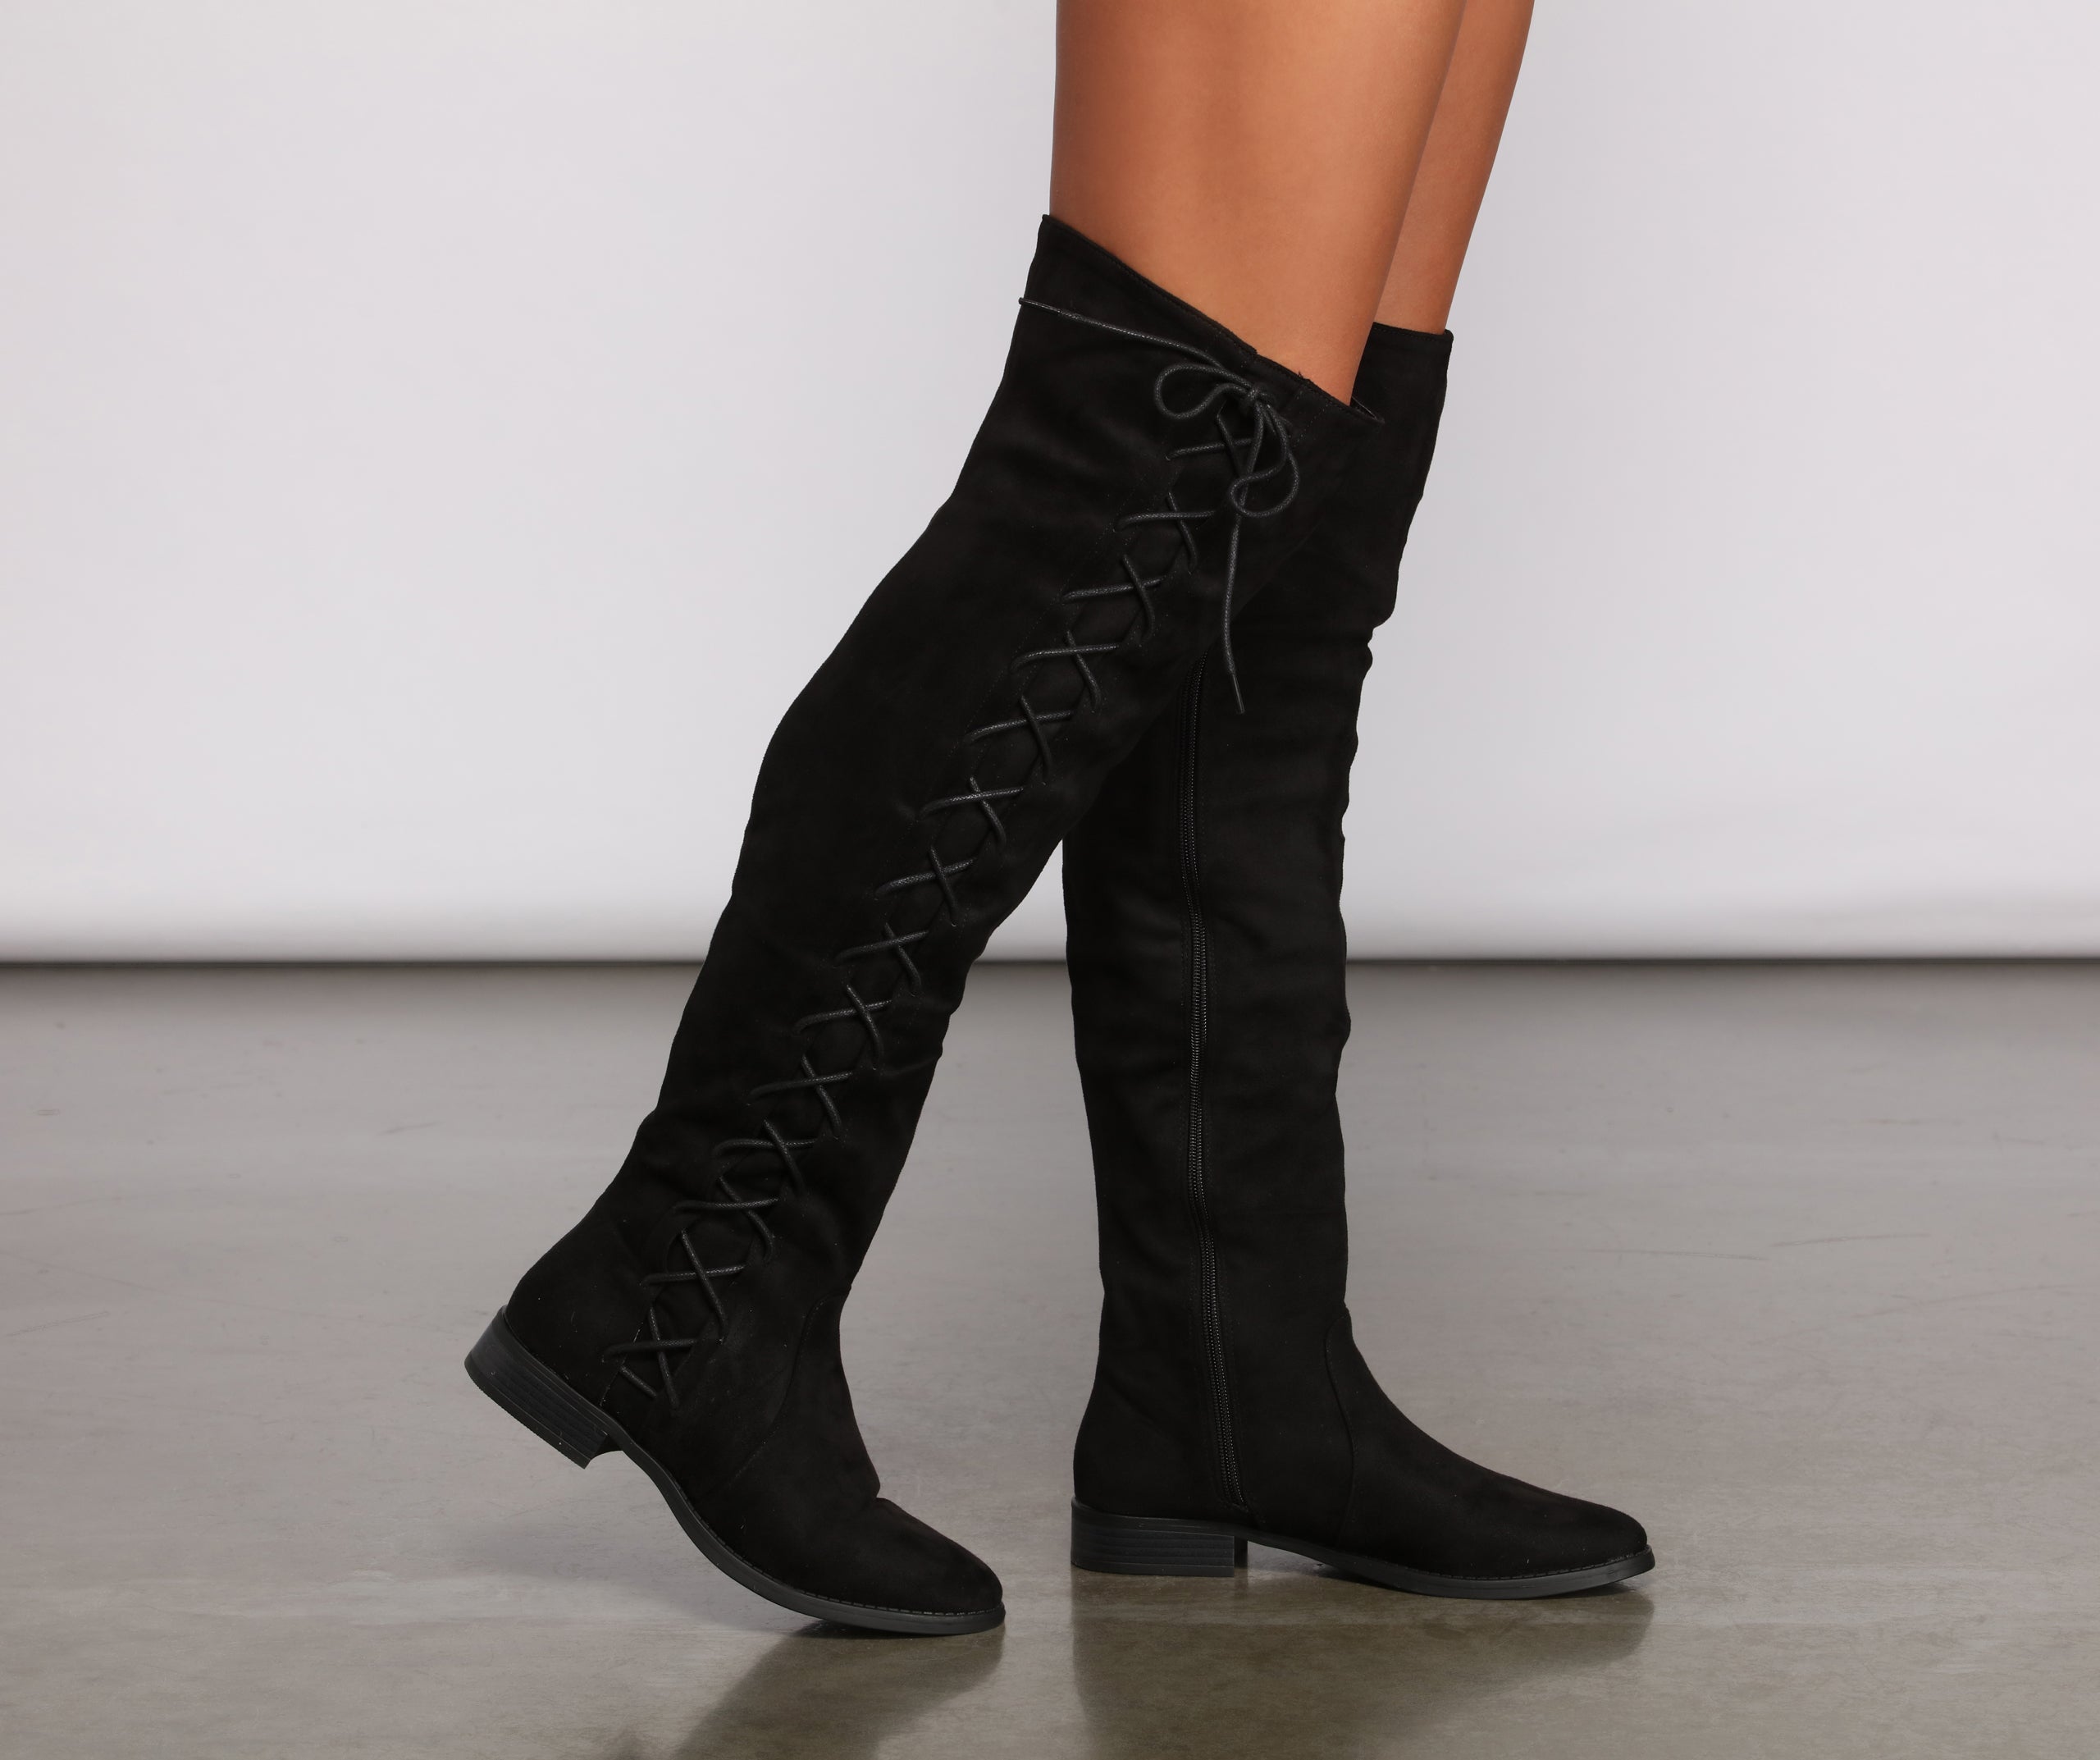 Stylish Lace-Up Over The Knee Boots